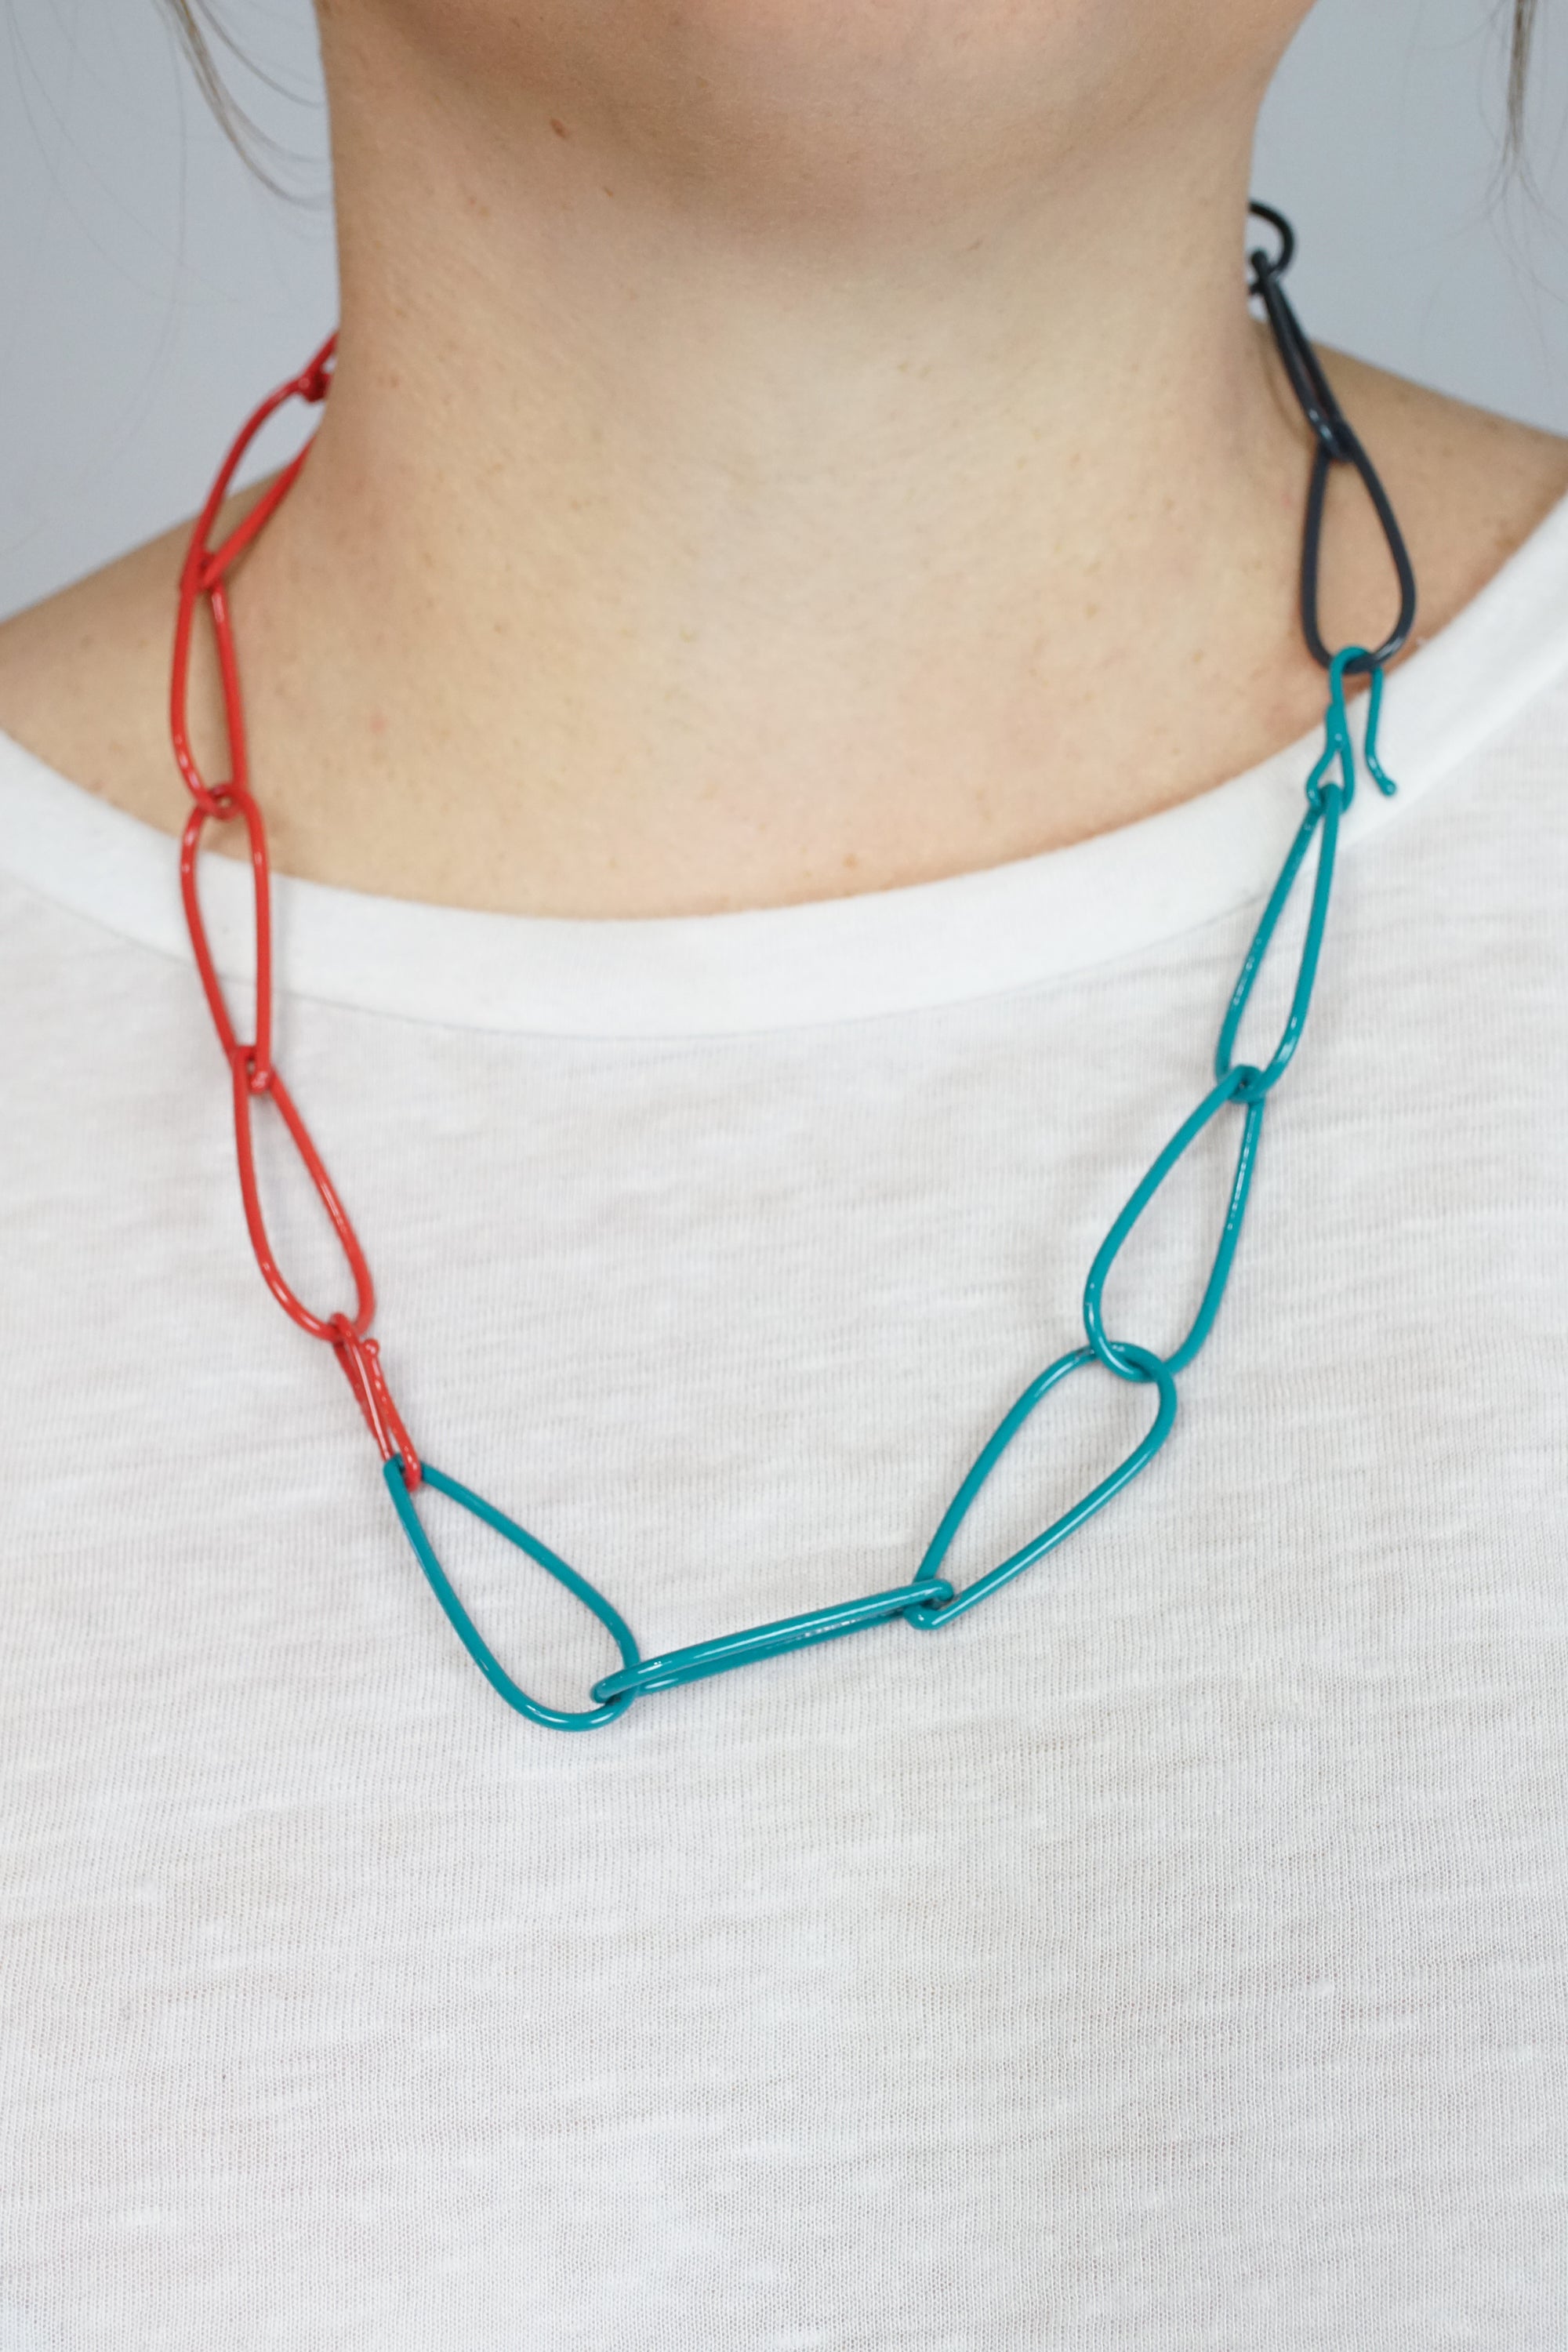 Modular Necklace in Midnight Grey, Coral Red, and Bold Teal